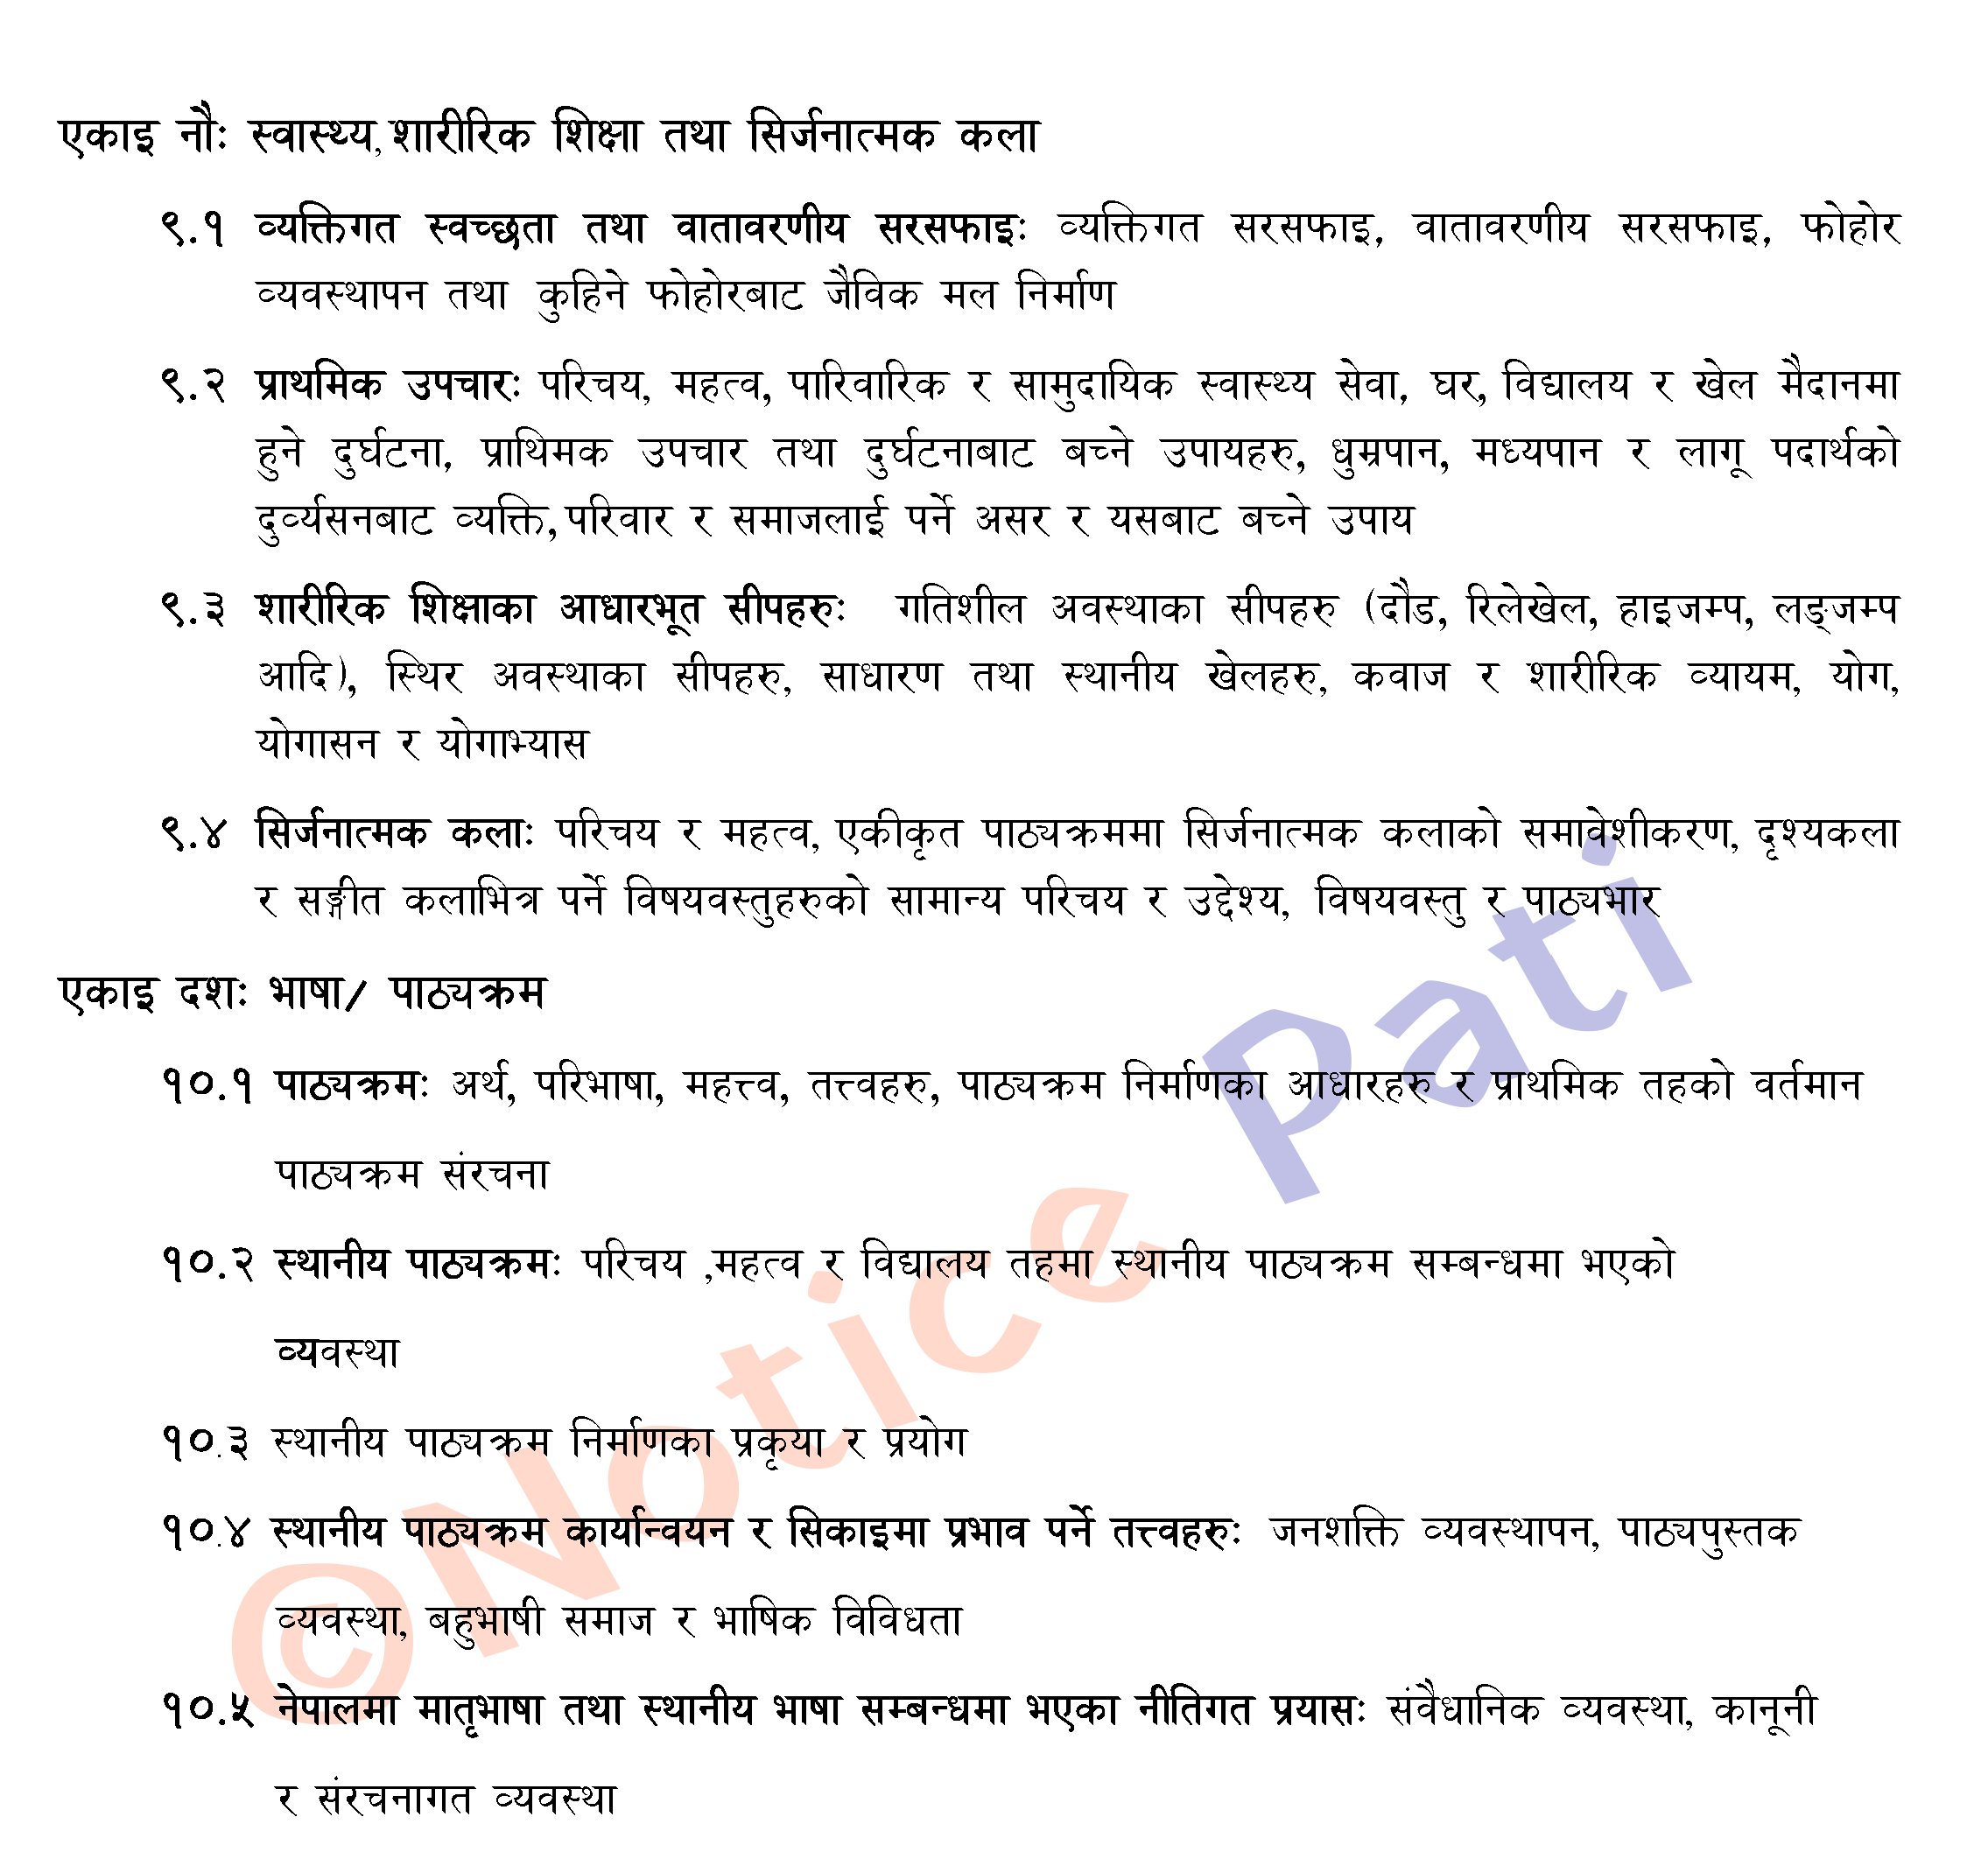 Primary Level Subjective Exam Syllabus This phase includes the subjective question.